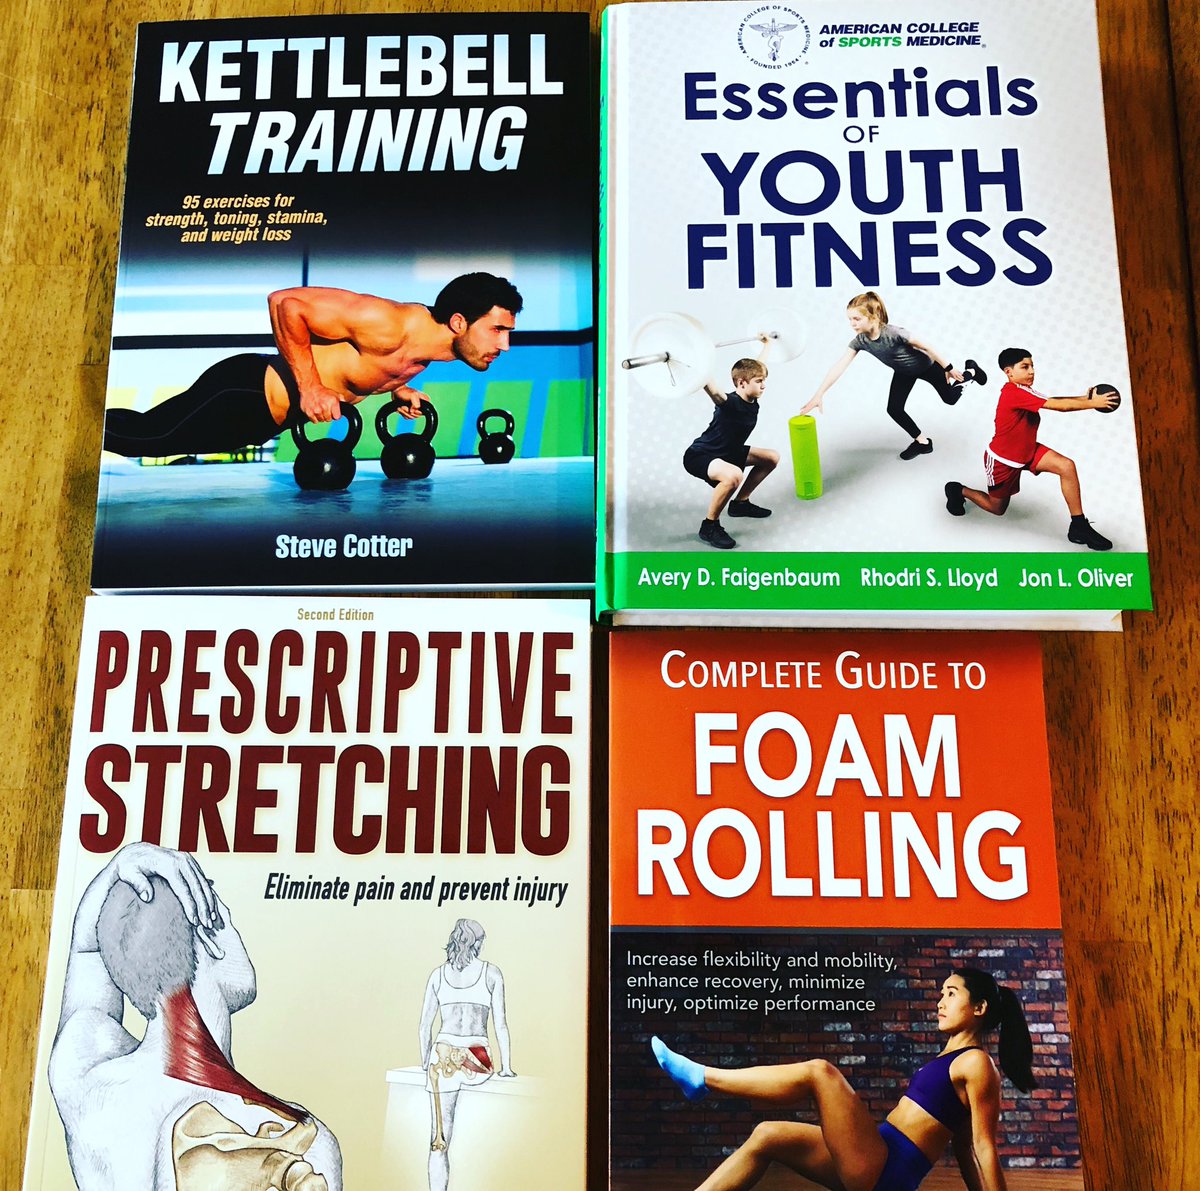 Did you know that I am a certified personal trainer through American College of Sports Medicine? Recertification is just around the corner and I can’t wait to dive into my new books!!!! #cpt #acsm #acsmcertified #personaltrainer #lifelonglearning